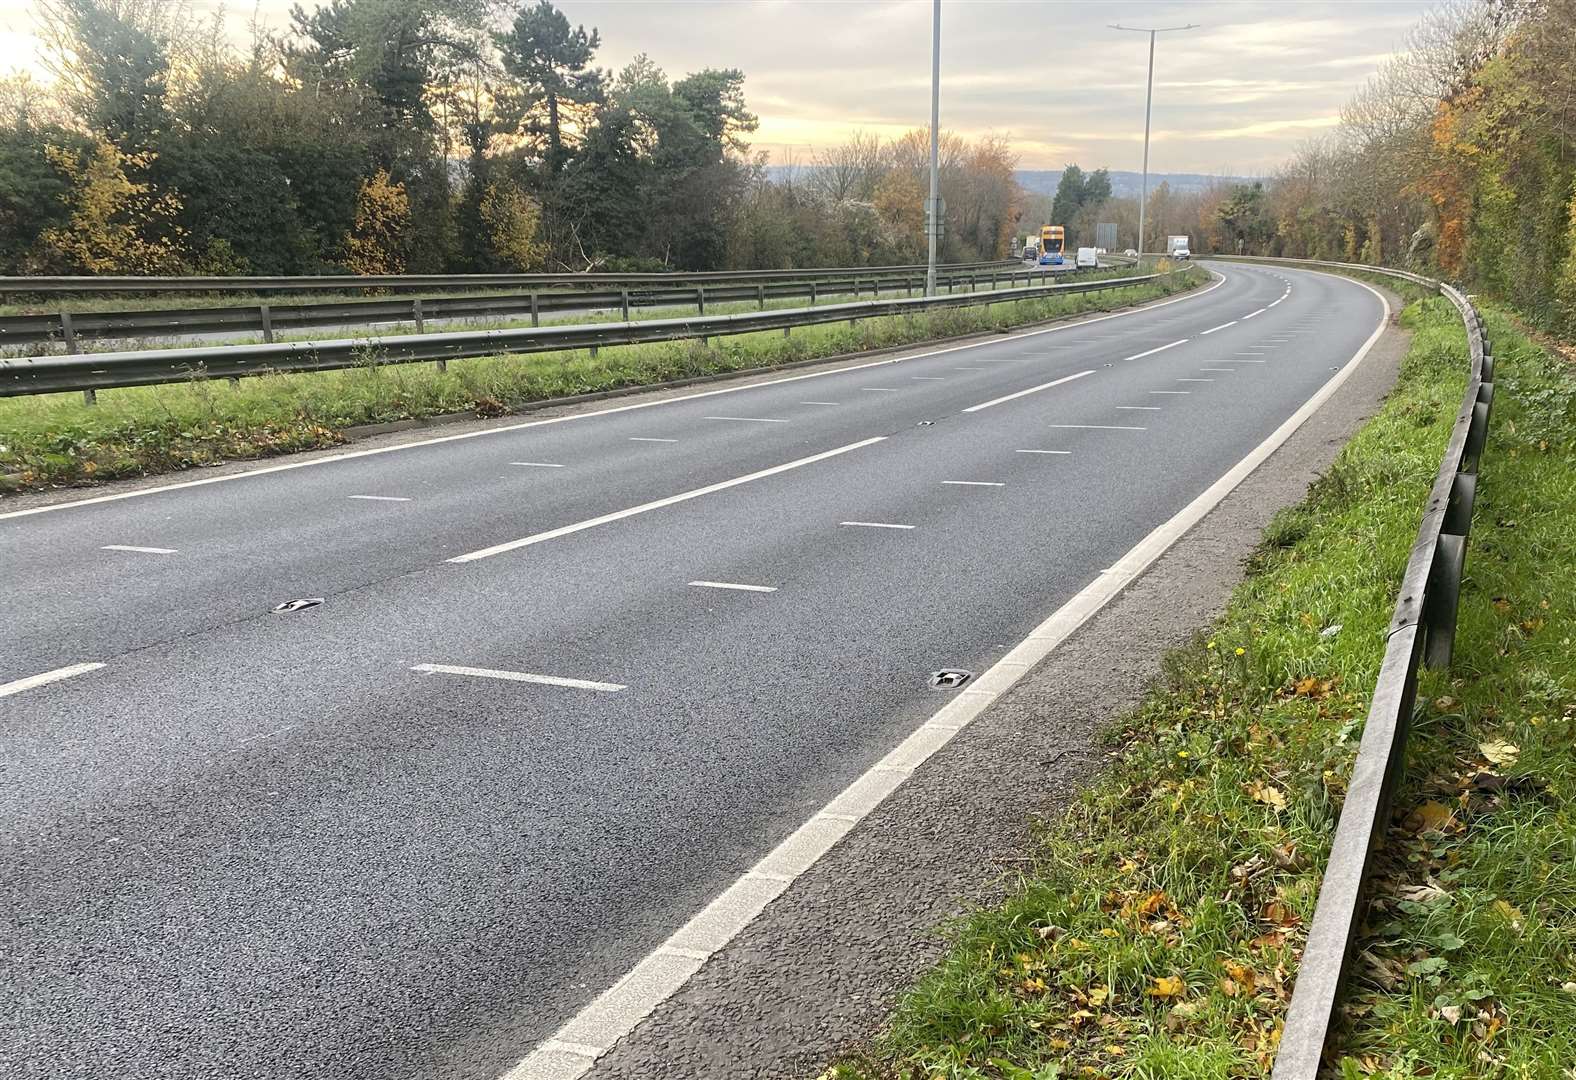 Guidelines for the cameras on the A249 Detling Hill